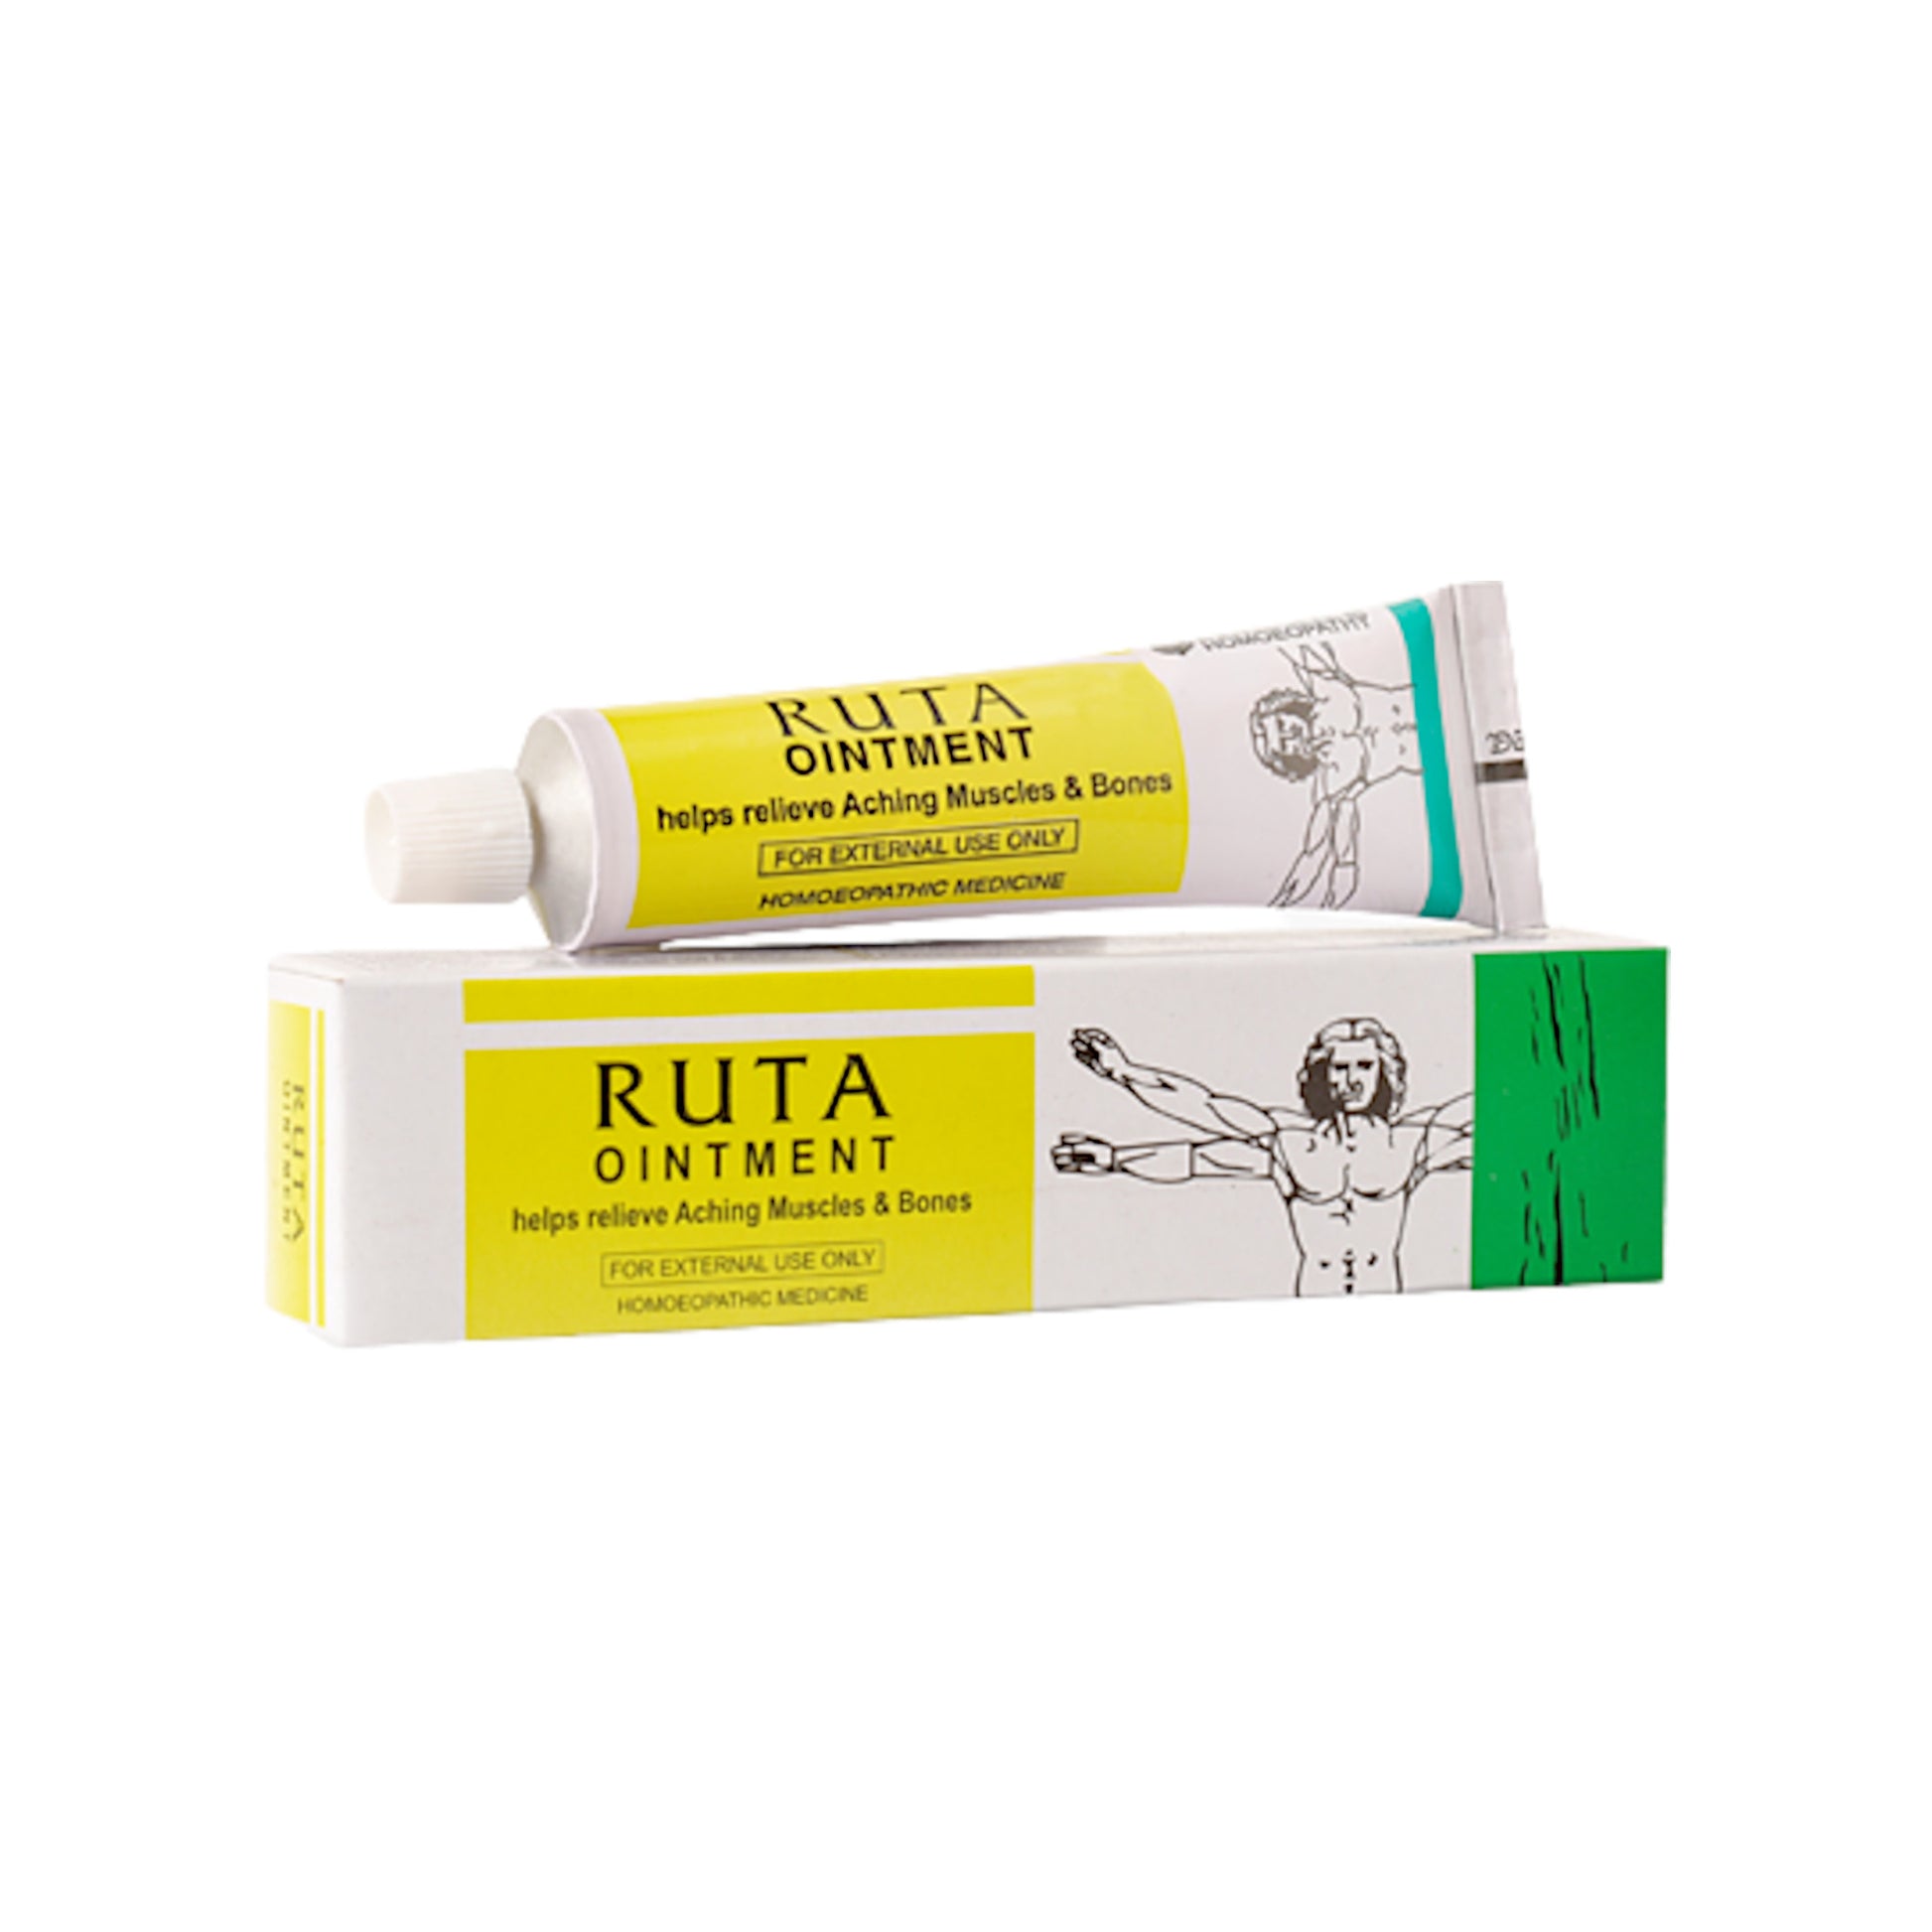 Image: Bakson's Ruta Ointment 25 g: Relief for sprains, strains, and tendonitis.